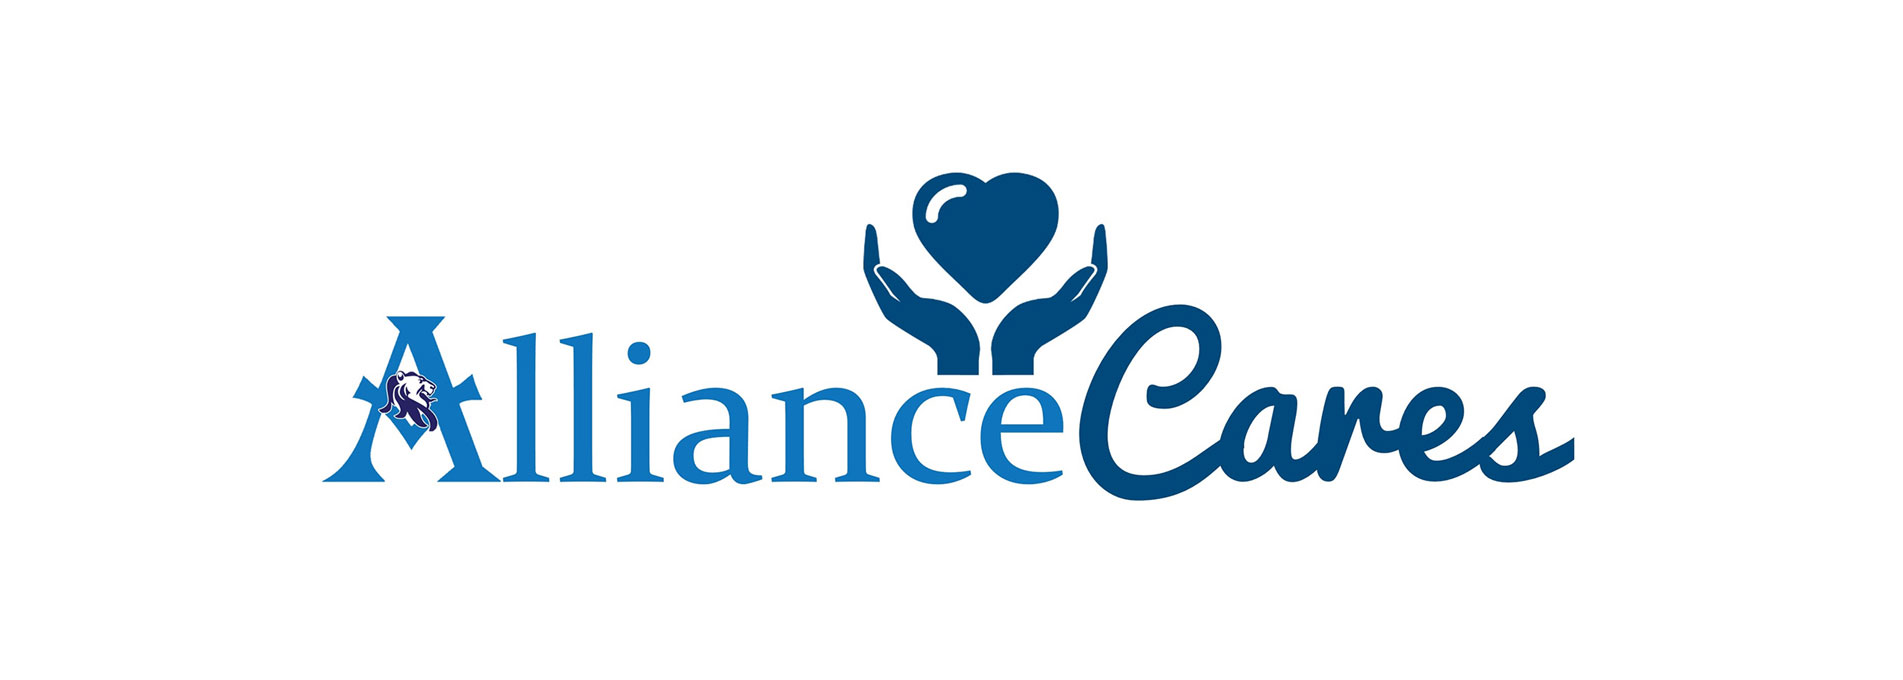 Alliance Financial & Insurance Agency | Independent Agency ...